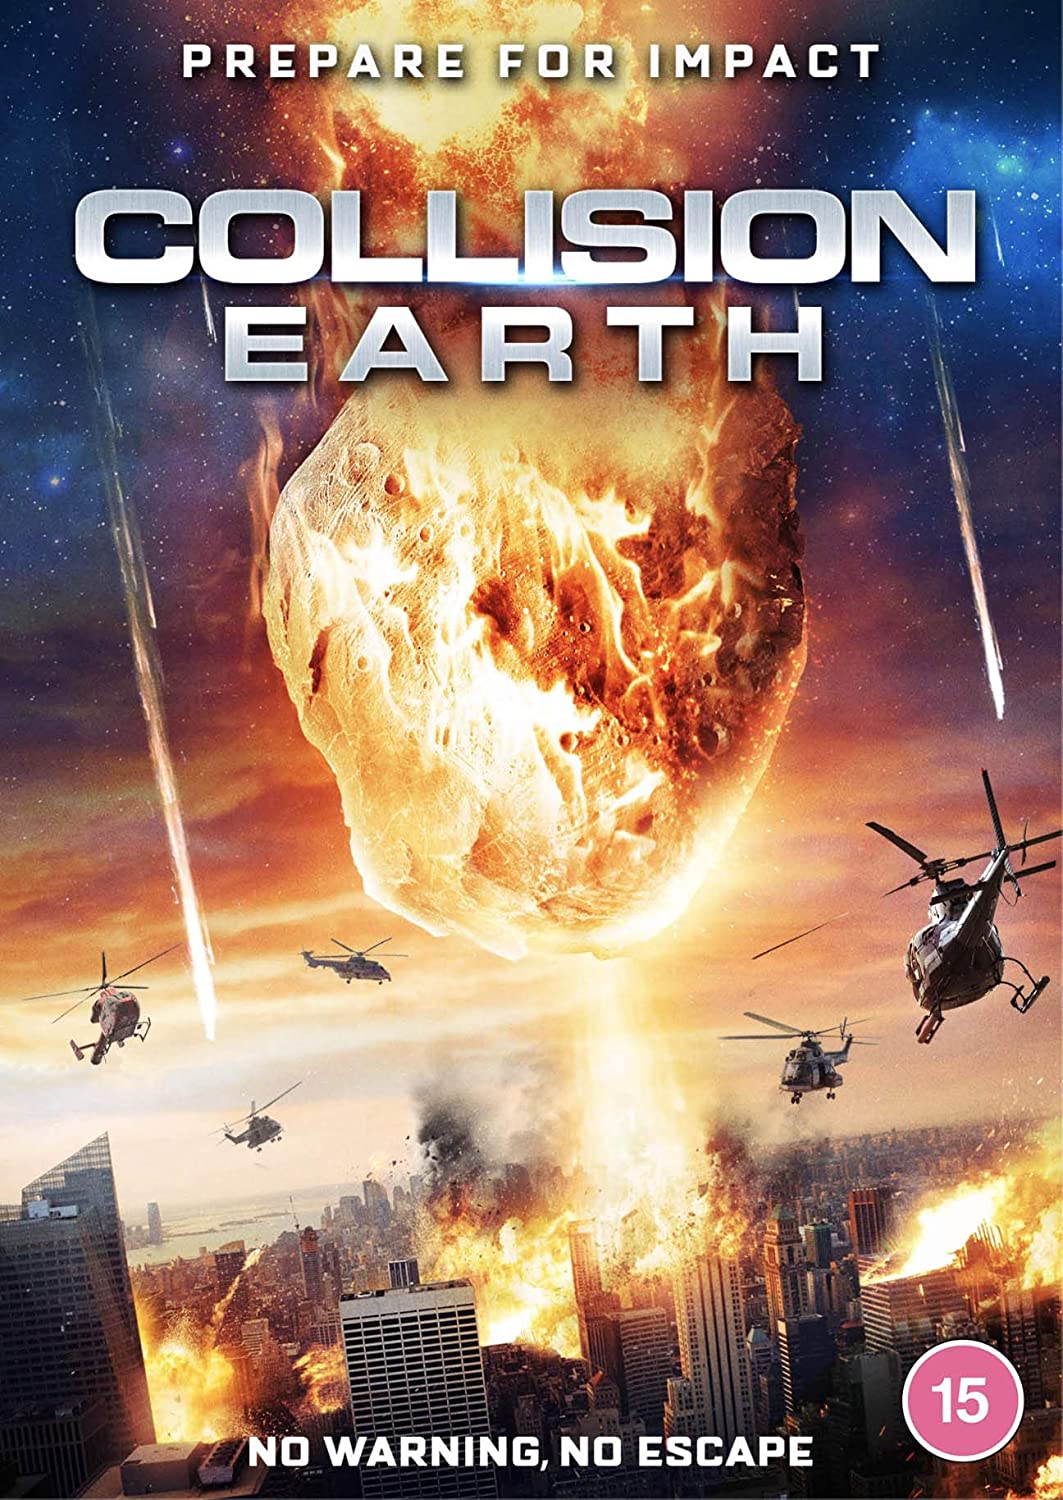 Collision Earth - Sci-fi/Action [DVD]